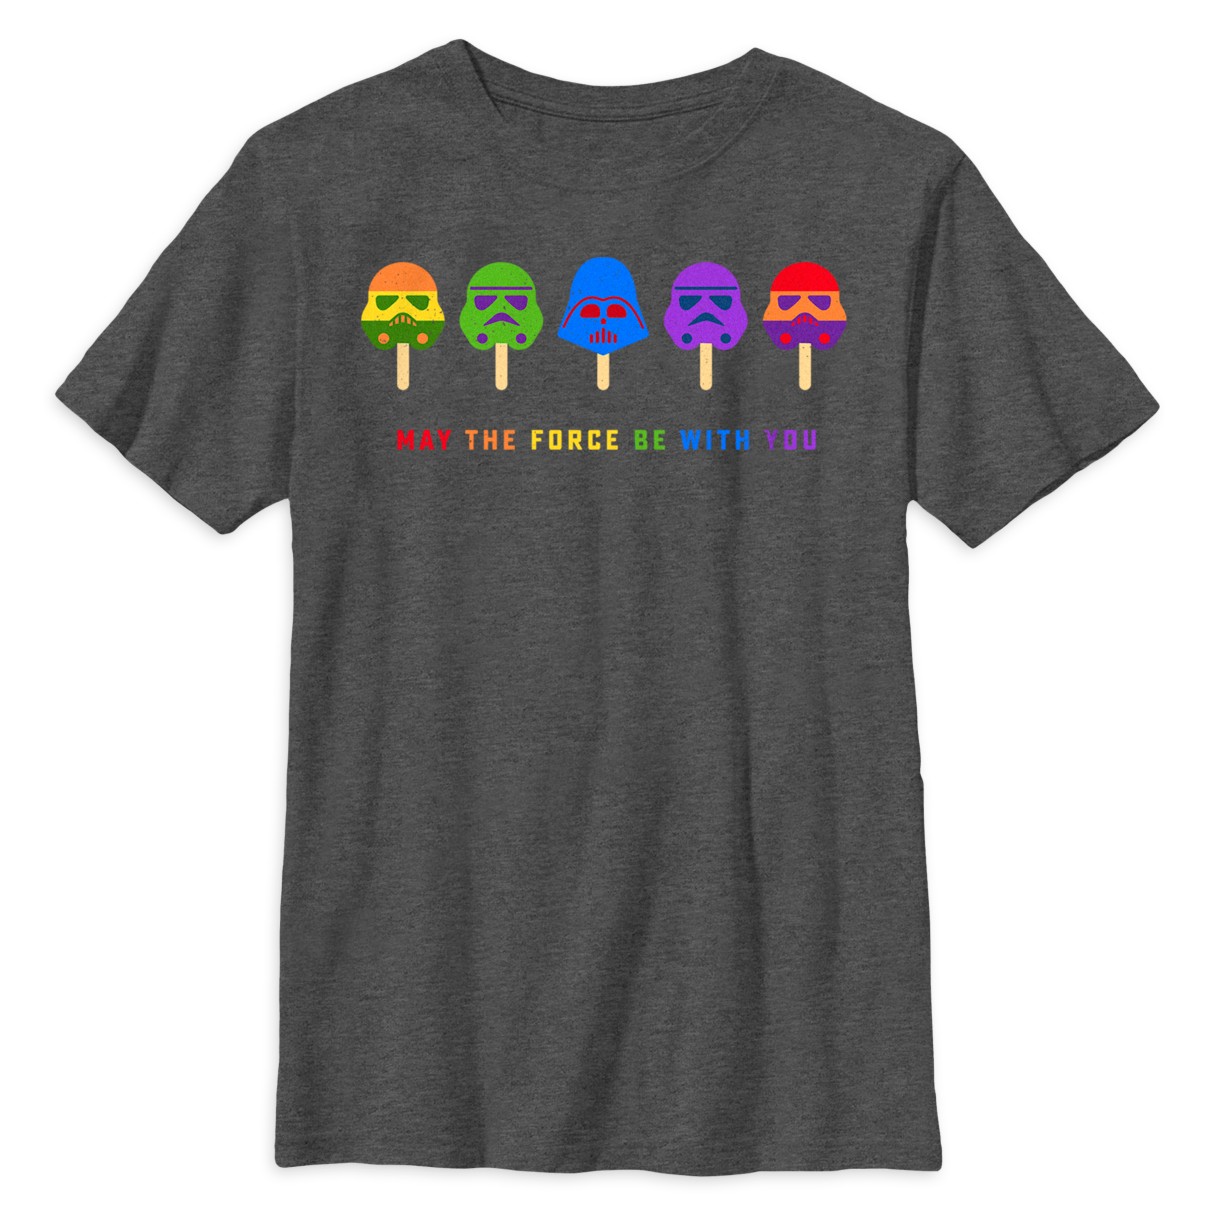 Star Wars ''May the Force Be with You'' T-Shirt for Kids – Star Wars Pride Collection